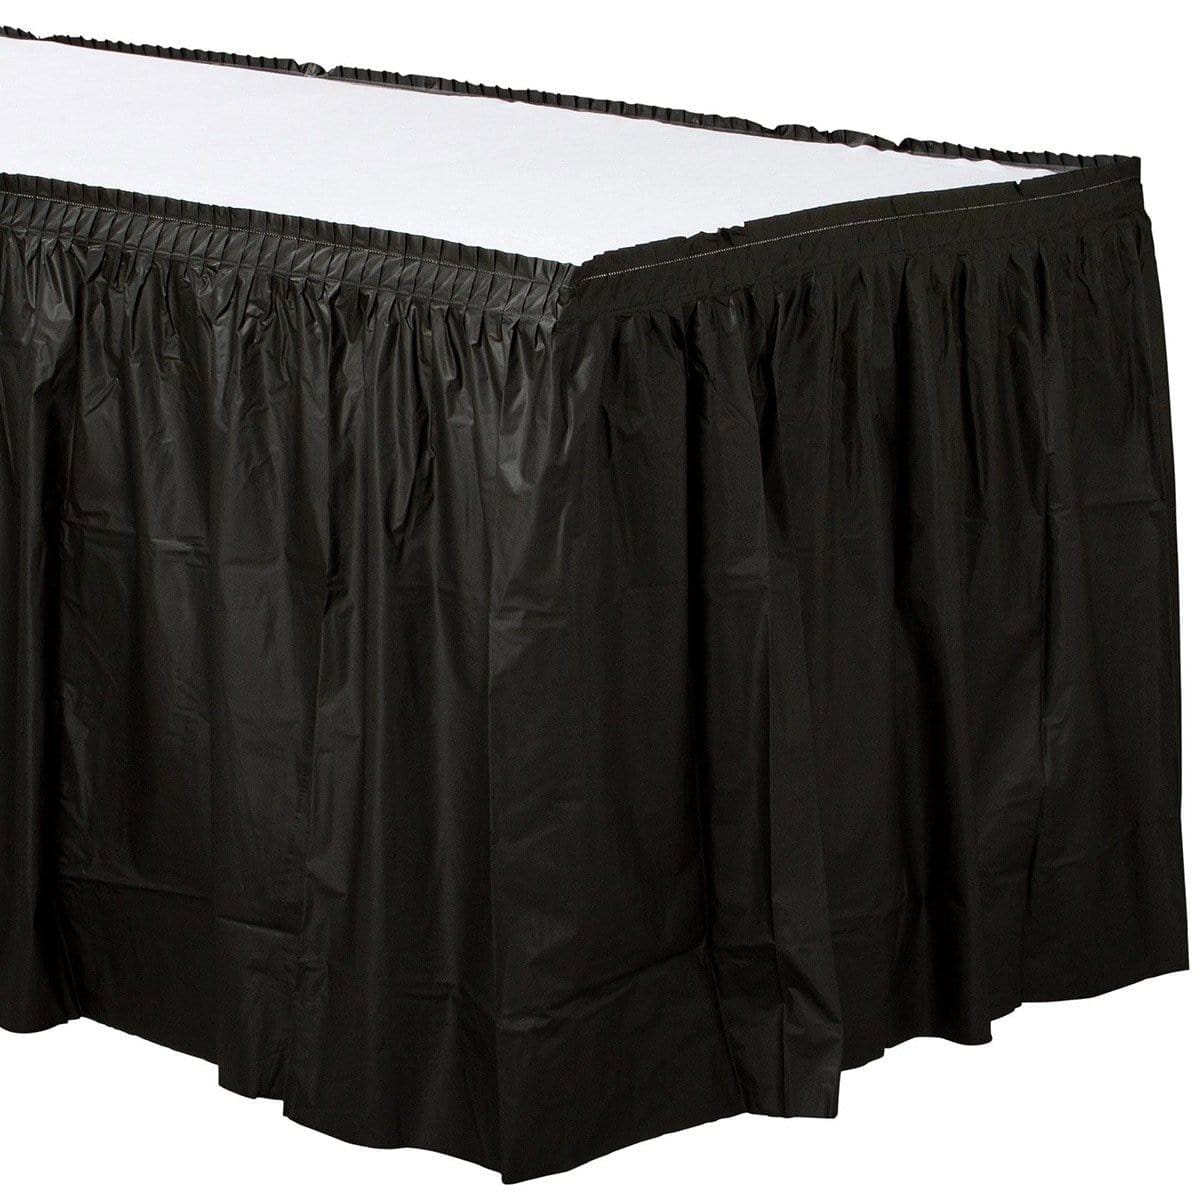 Buy plasticware Jet Black Plastic Table skirt sold at Party Expert